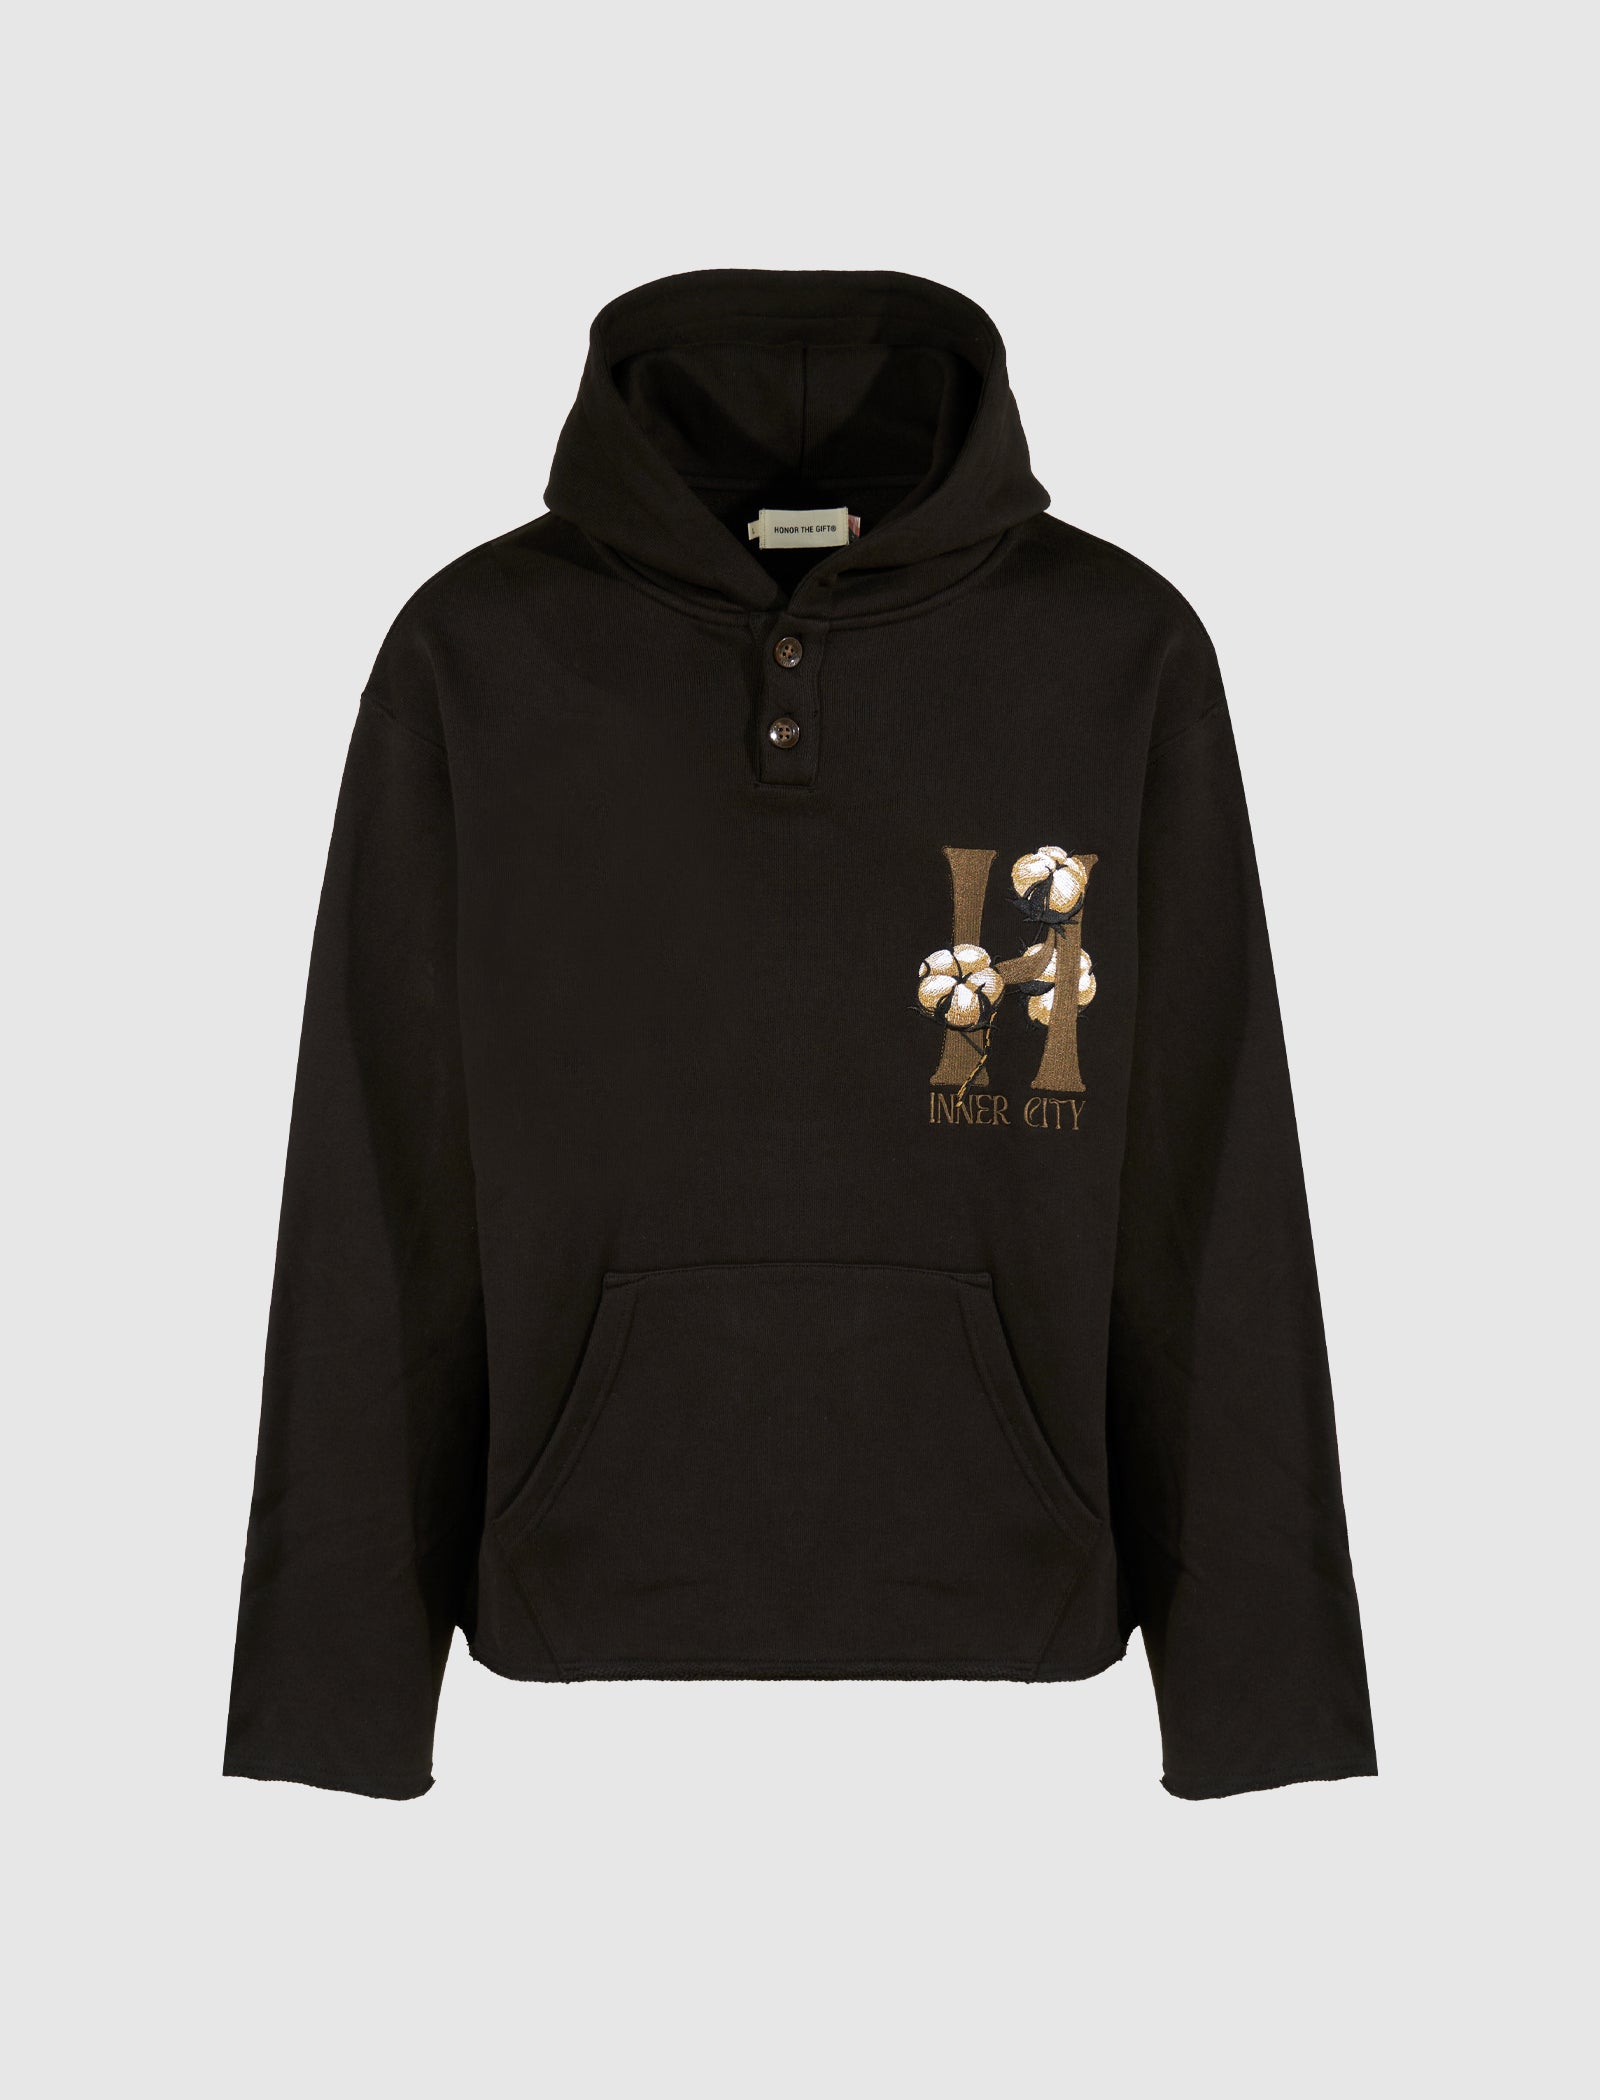 A-SPRING COTTON HOODIE